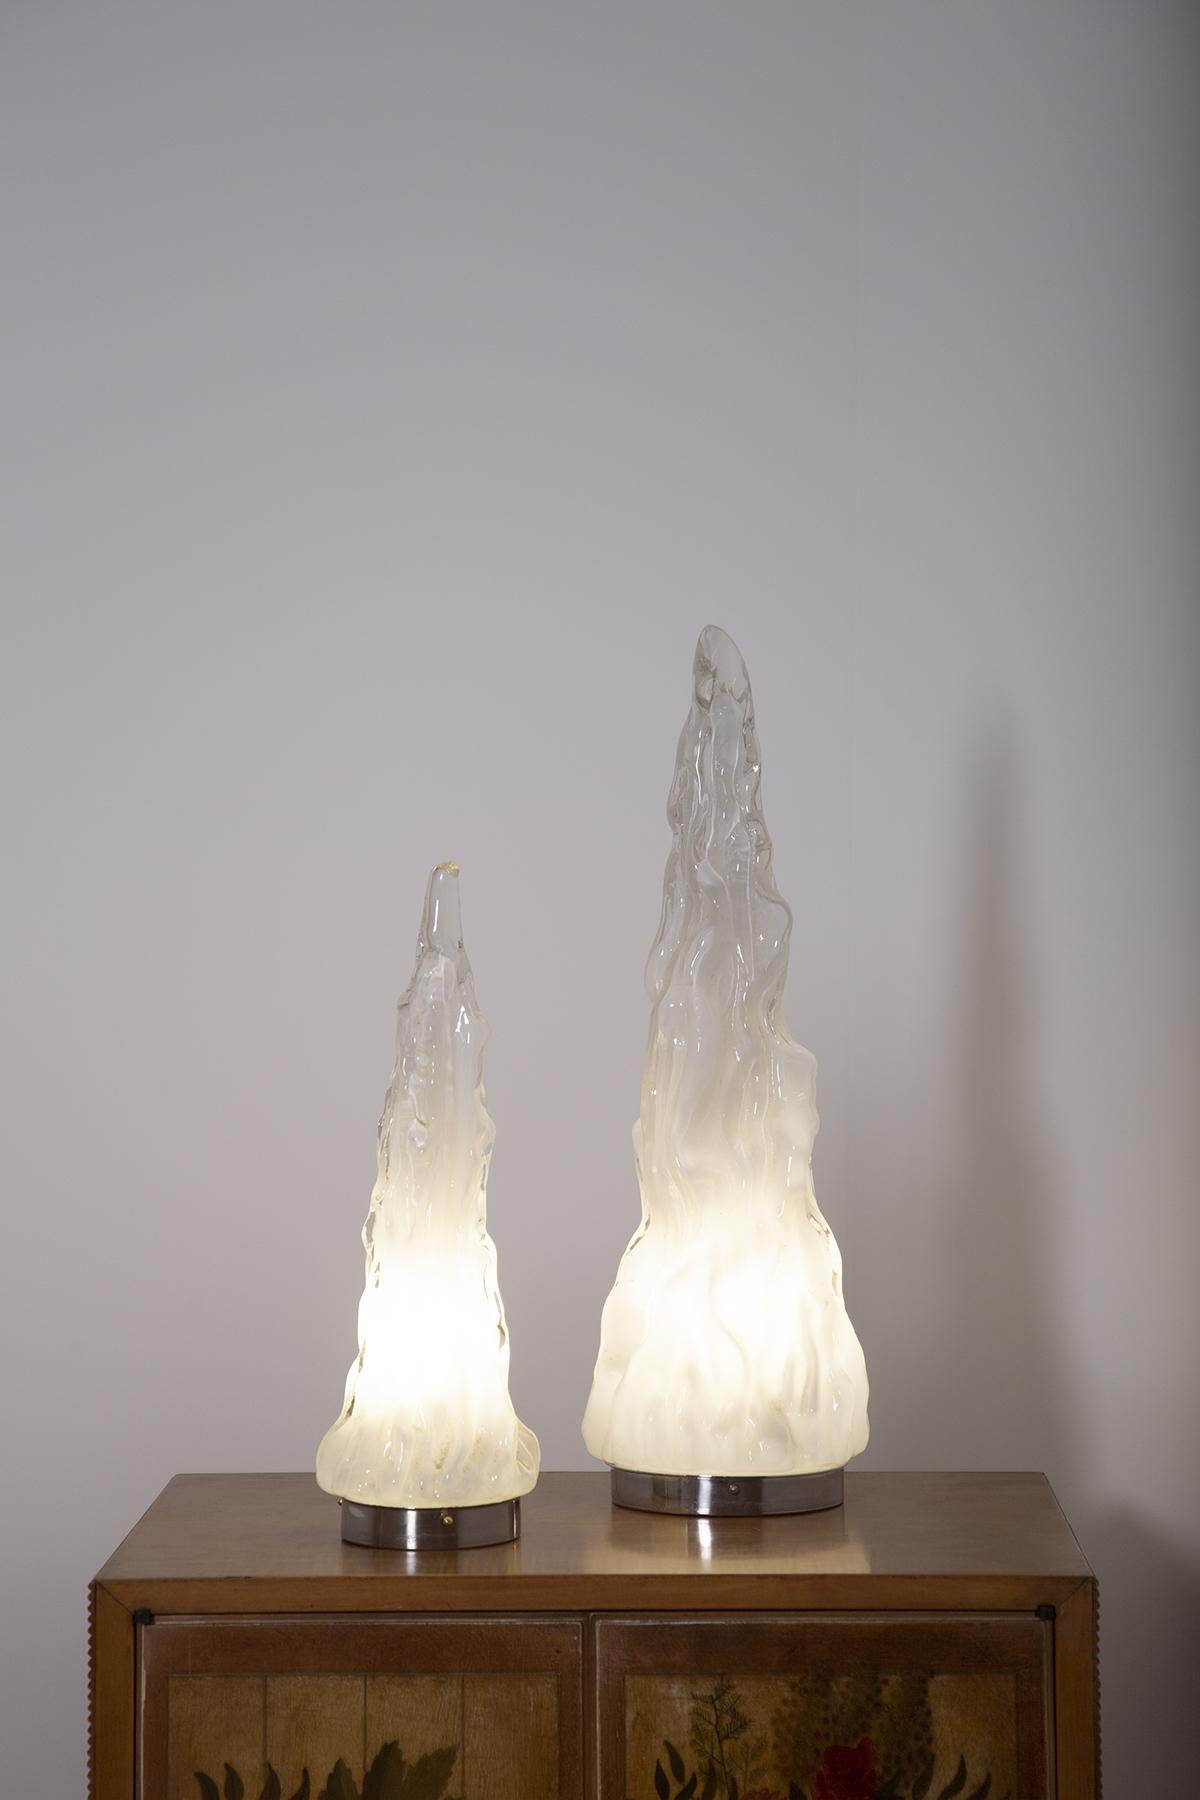 Beautiful pair of table lamps designed by Carlo Nason for the Vistosi manufacture, 1960. The lamps are made of blown Murano and lattimo glass. The lamps have a pyramidal and iceberg shape. Well worked in its shapes it rests on an aluminium base. The